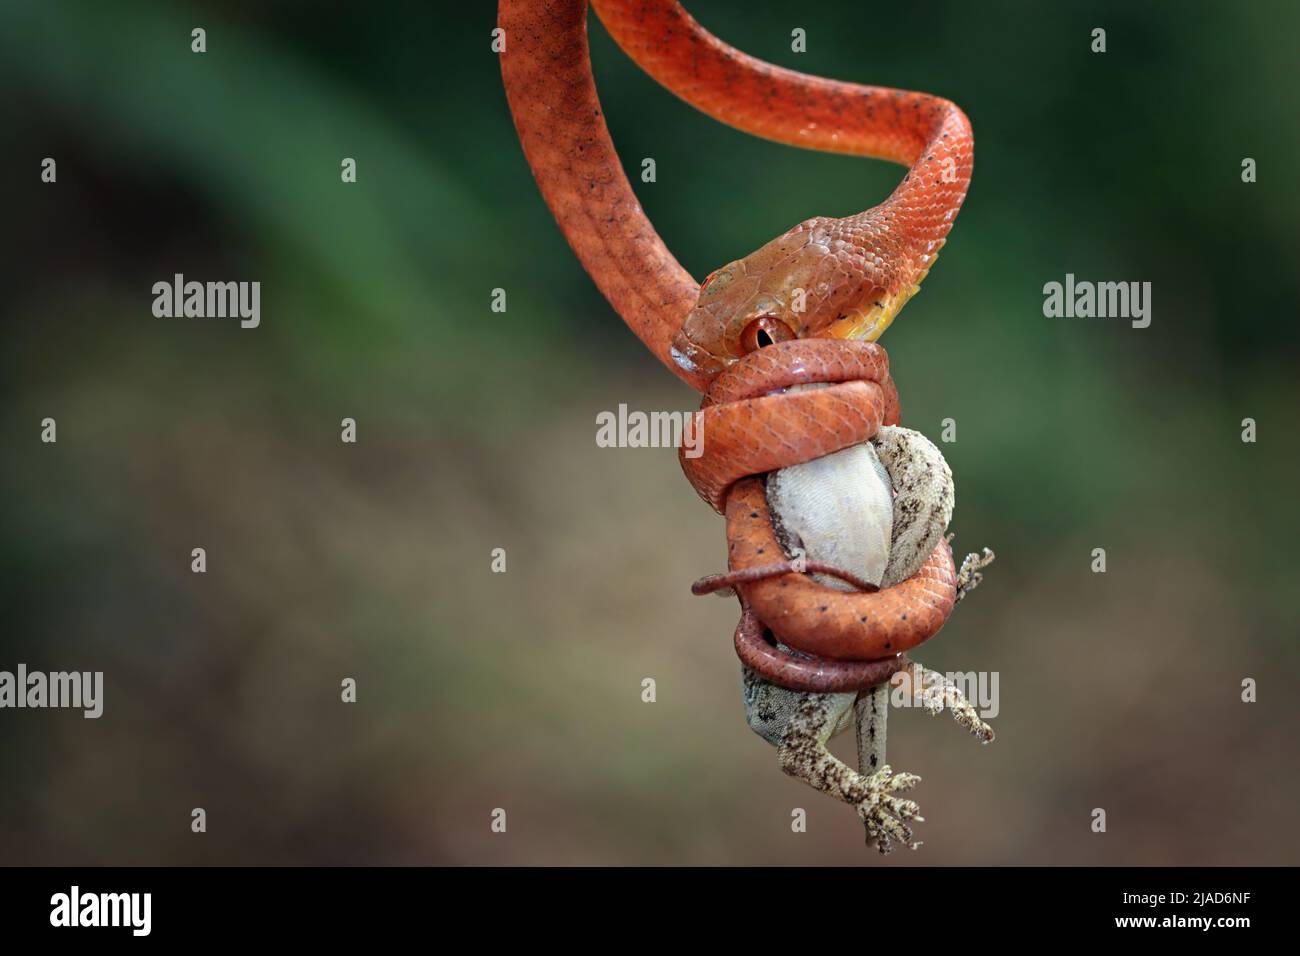 Juvenile Red boiga snake hanging on a branch eating a rodent, Indonesia Stock Photo